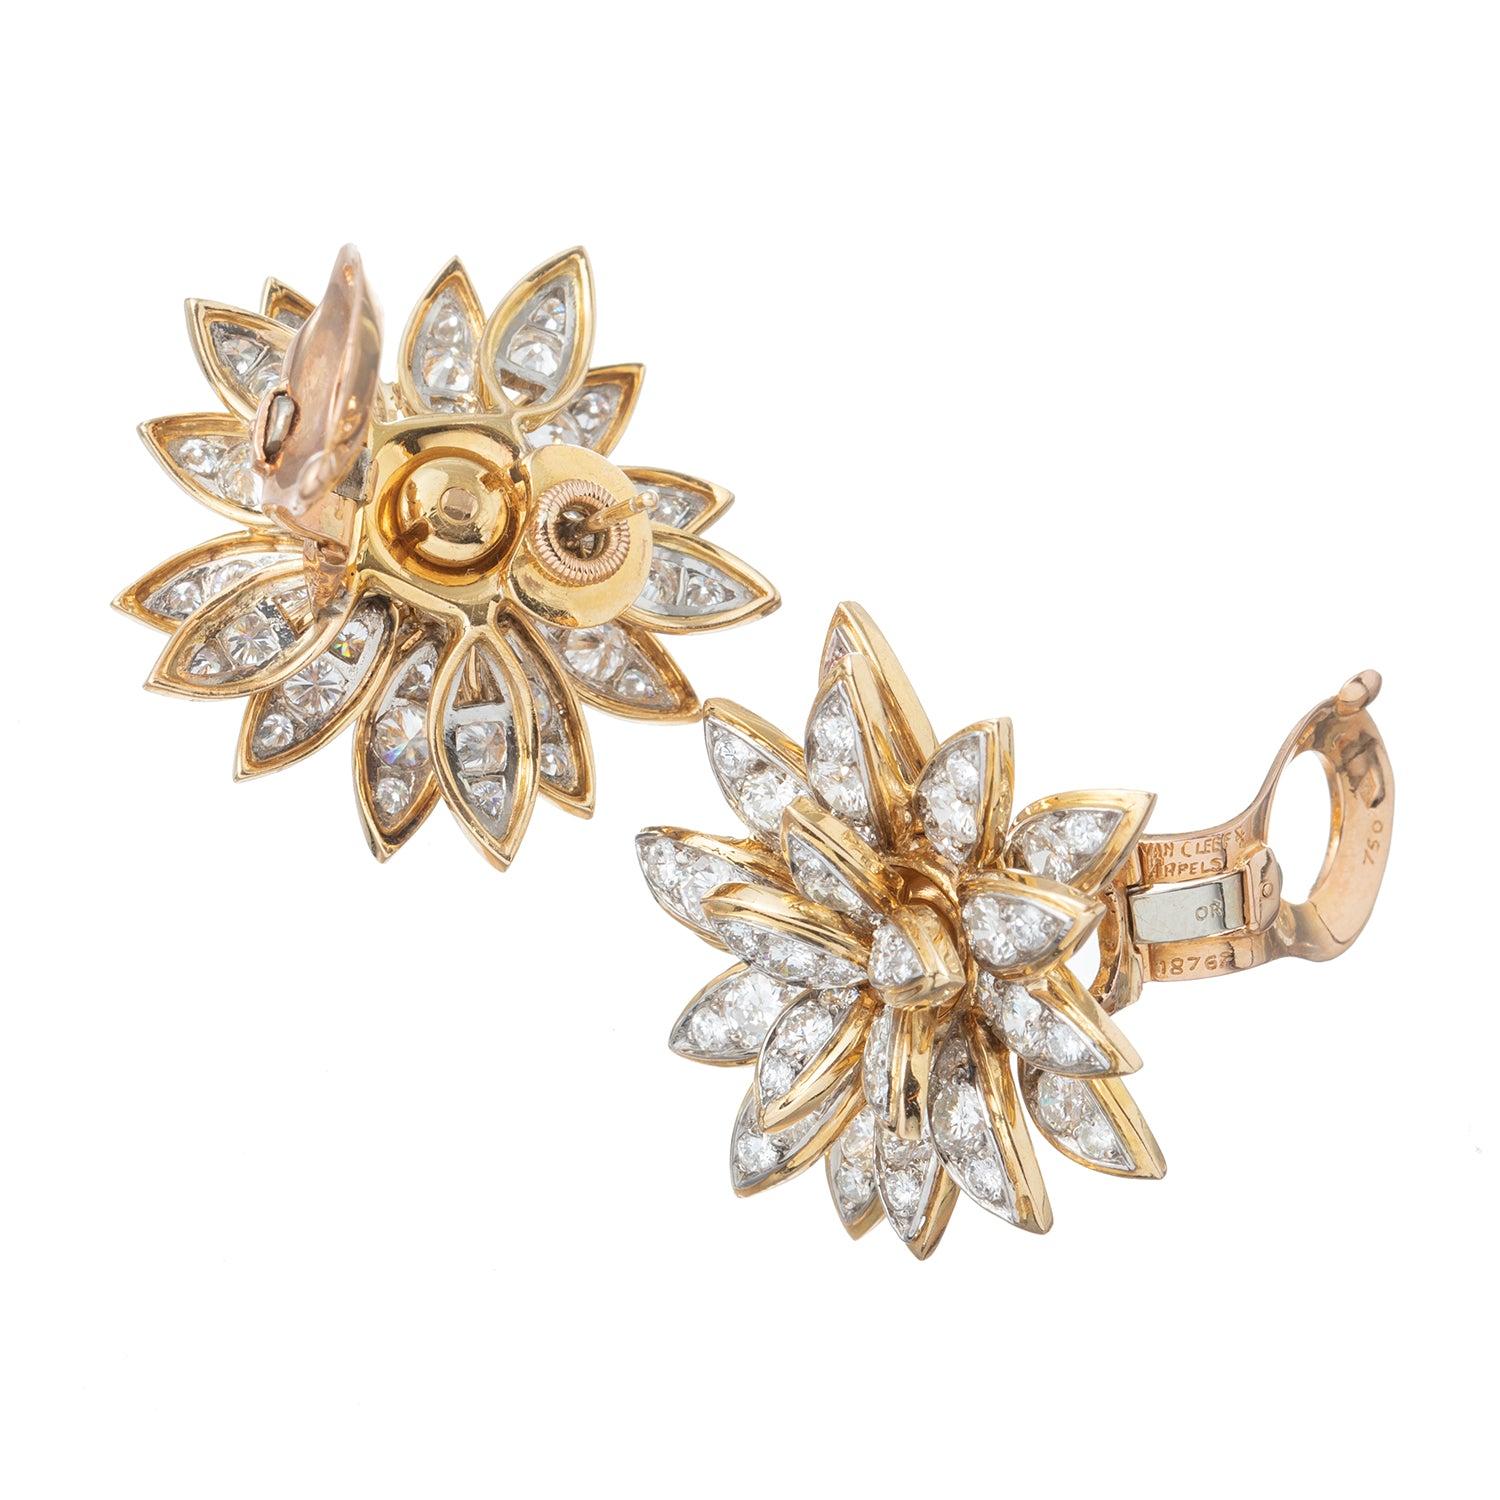 Experience the timeless elegance and exquisite craftsmanship of Van Cleef & Arpels with these diamond Lotus Flower earrings from the 1950s.  The magnificent earrings, crafted in 18k yellow gold, feature a stunning arrangement of 120 fine colorless